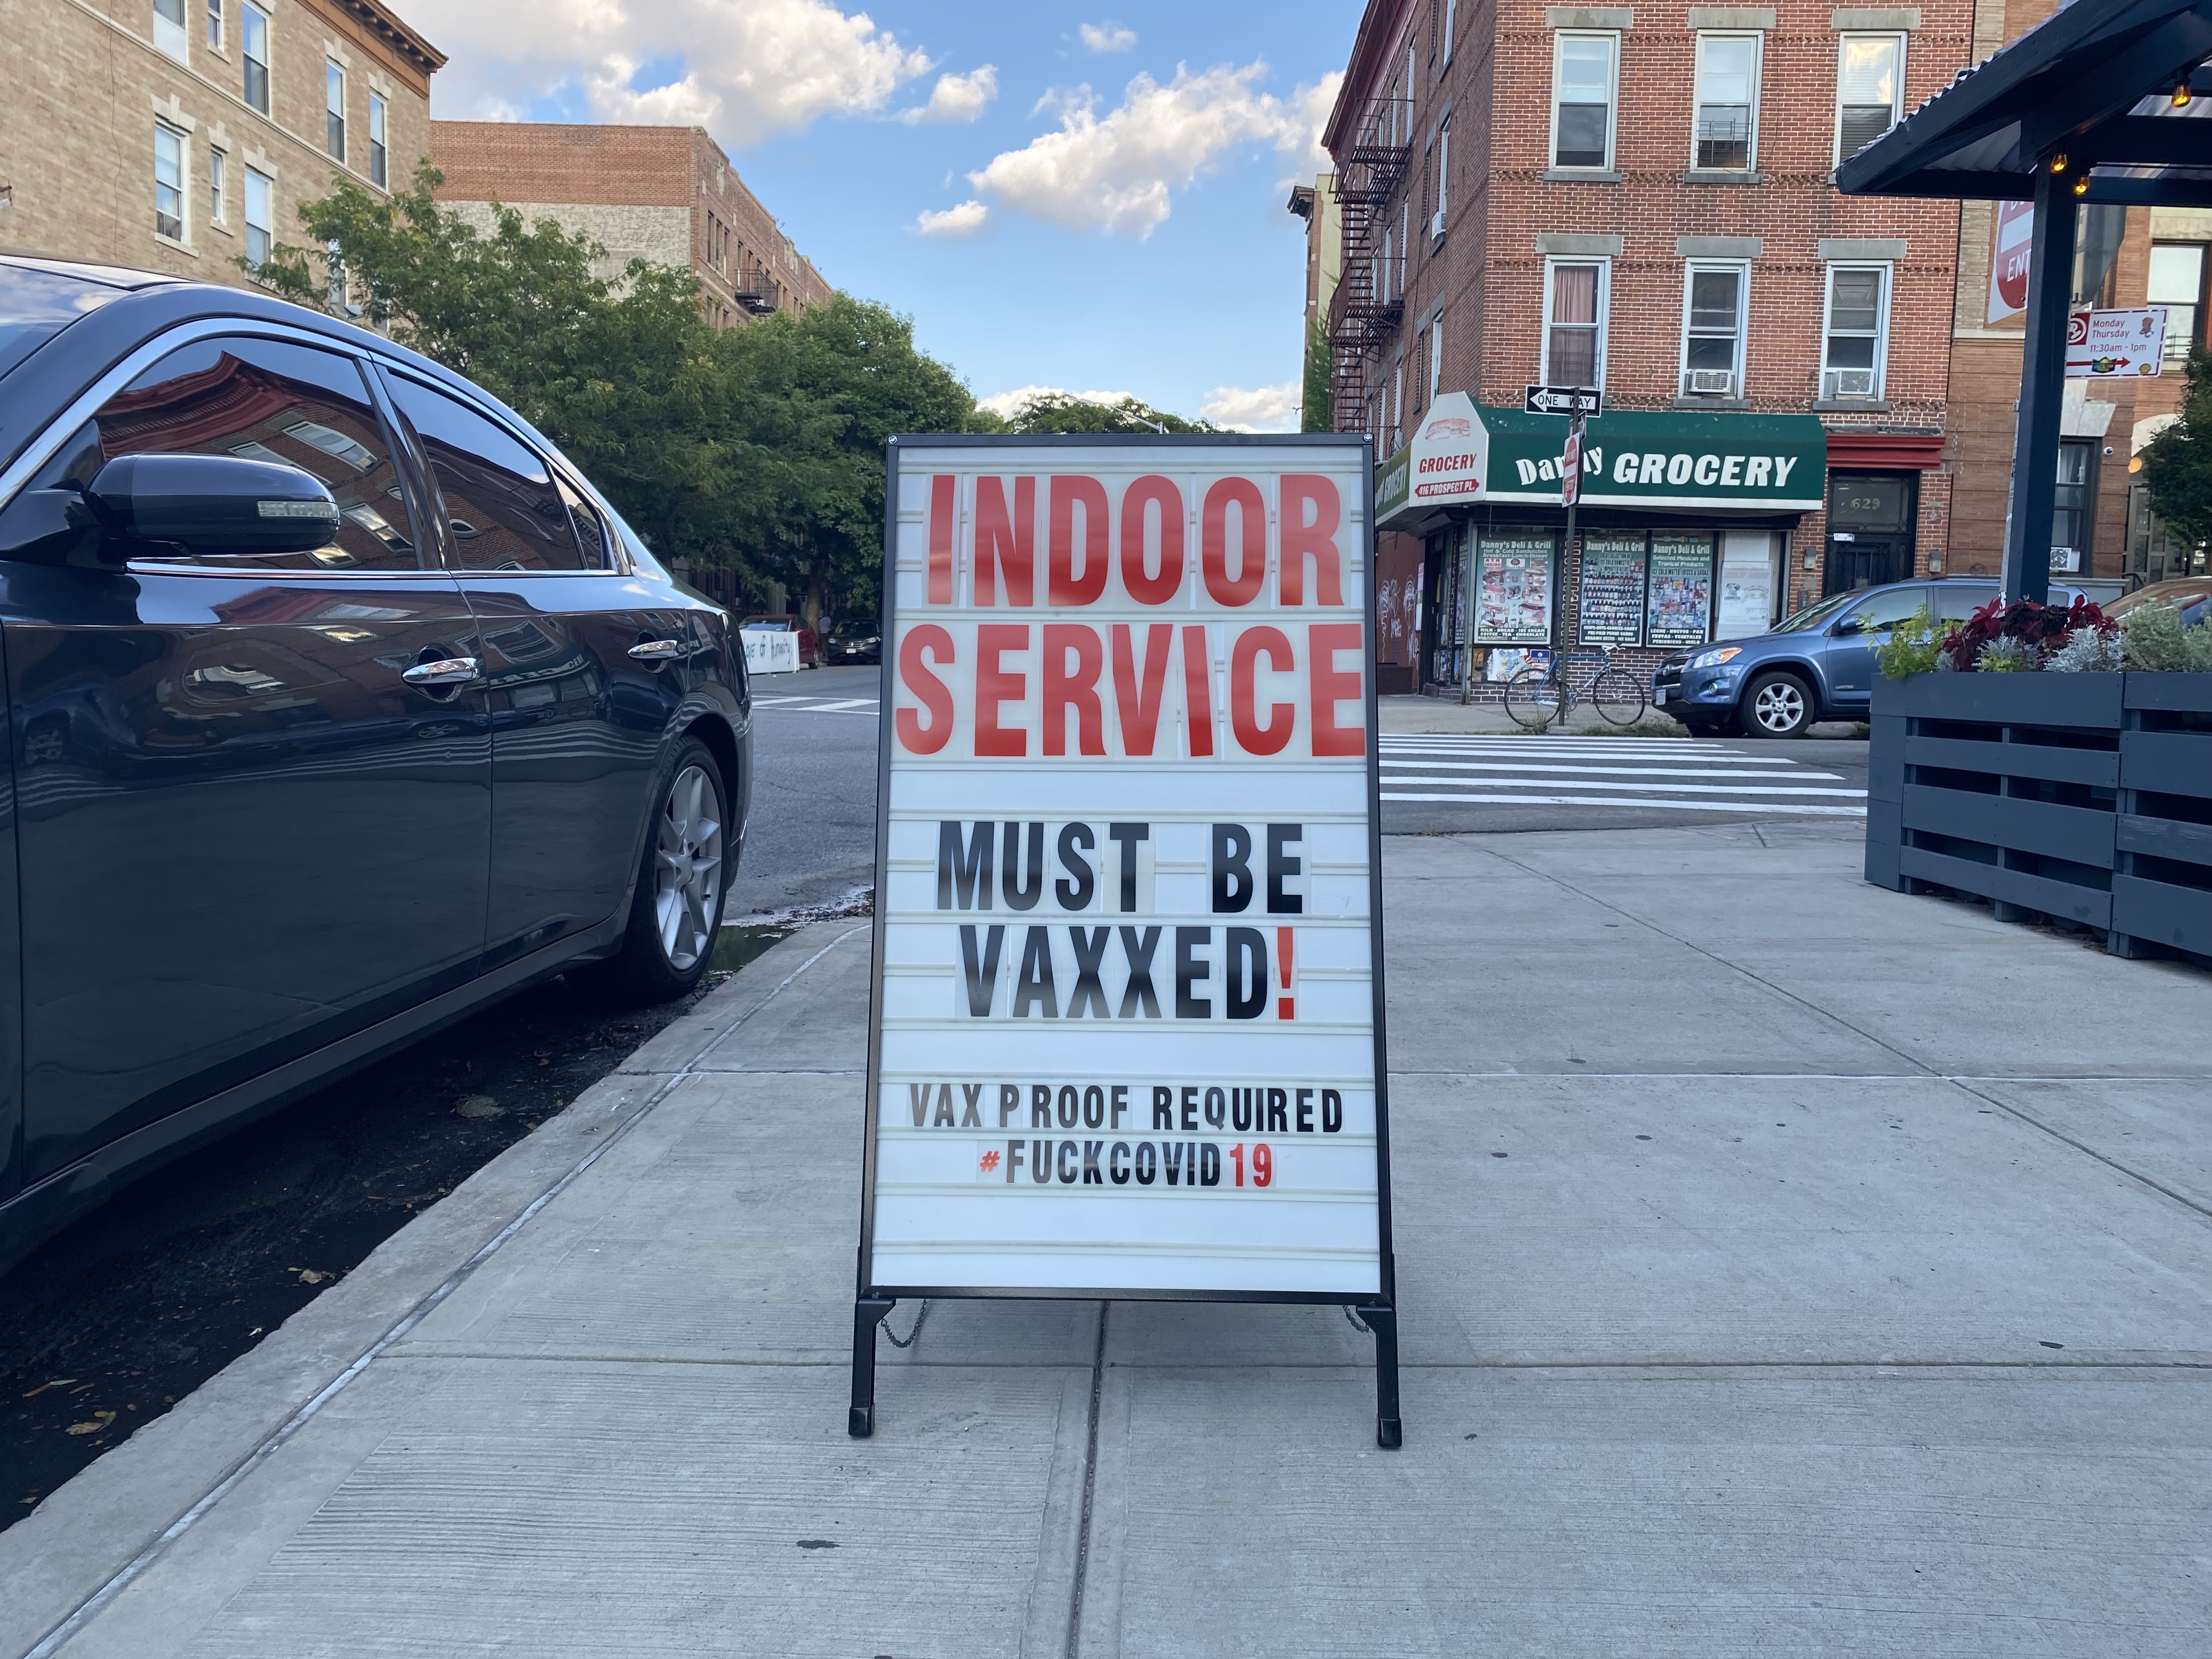 A sandwich board sign with the words “Indoor service must be vaxxed! Vax proof required #fuckcovid19”